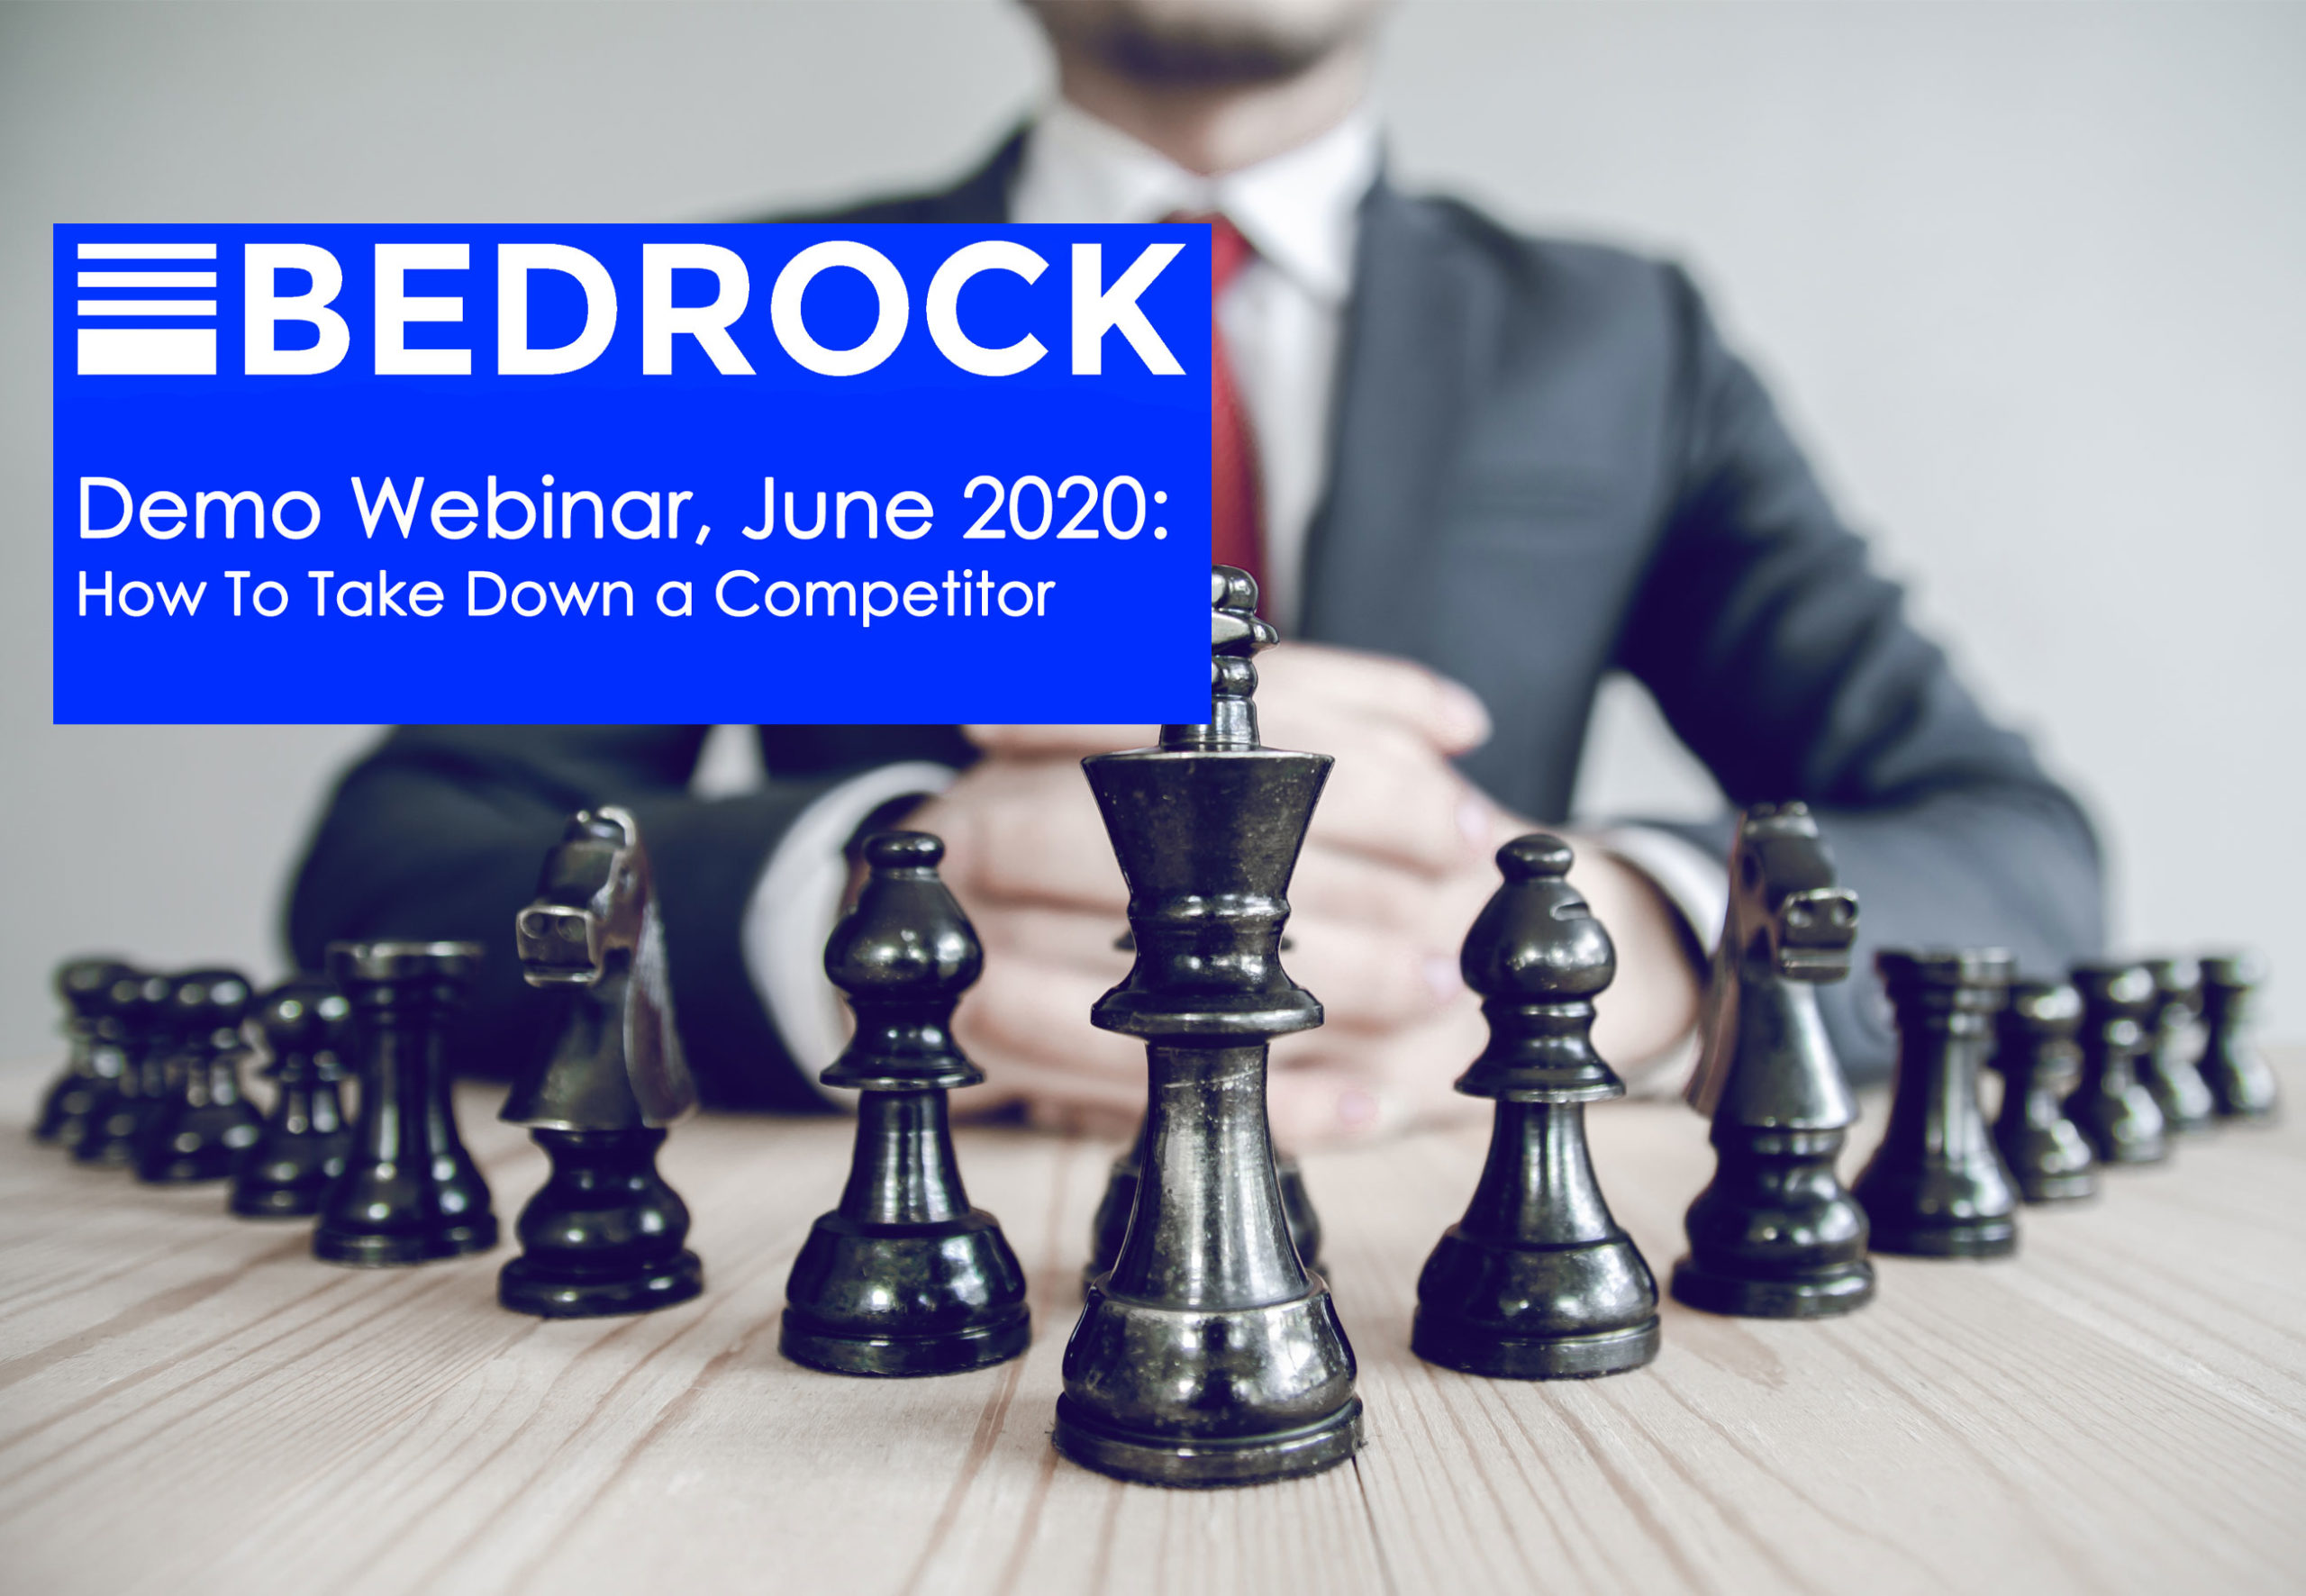 Bedrock Demo Webinar: How to Take down a Competitor